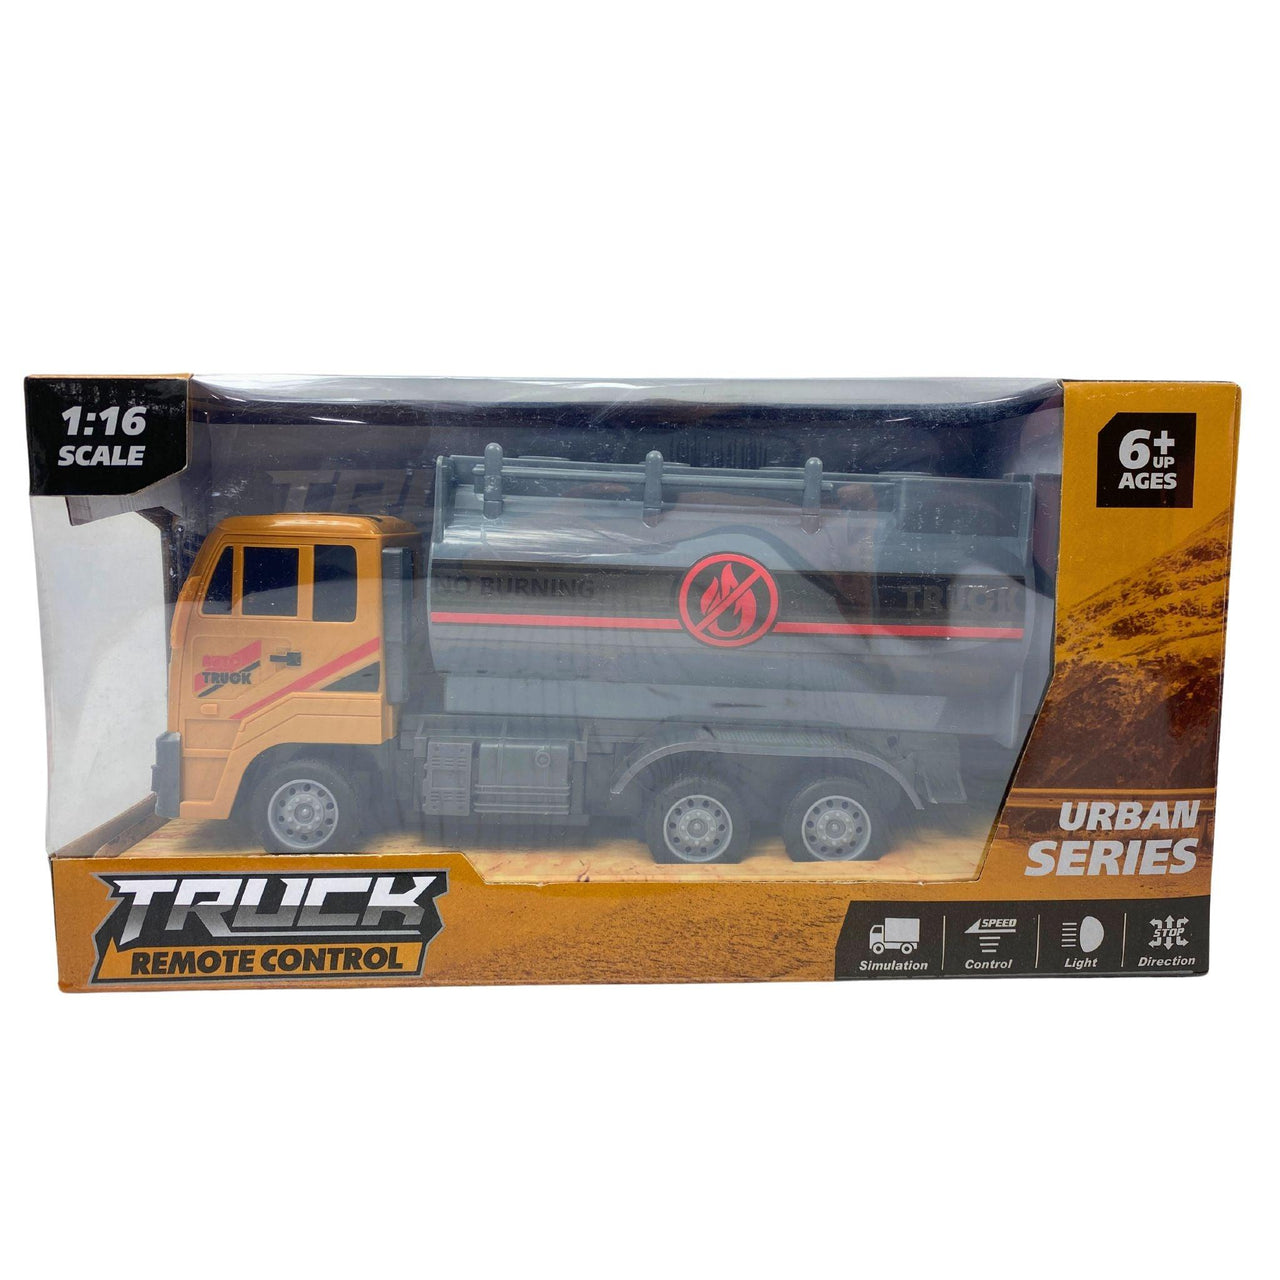 Urban Series Truck Remote Control 1:16 SCALE for Ages 6+ (18 Pcs Lot) - Discount Wholesalers Inc